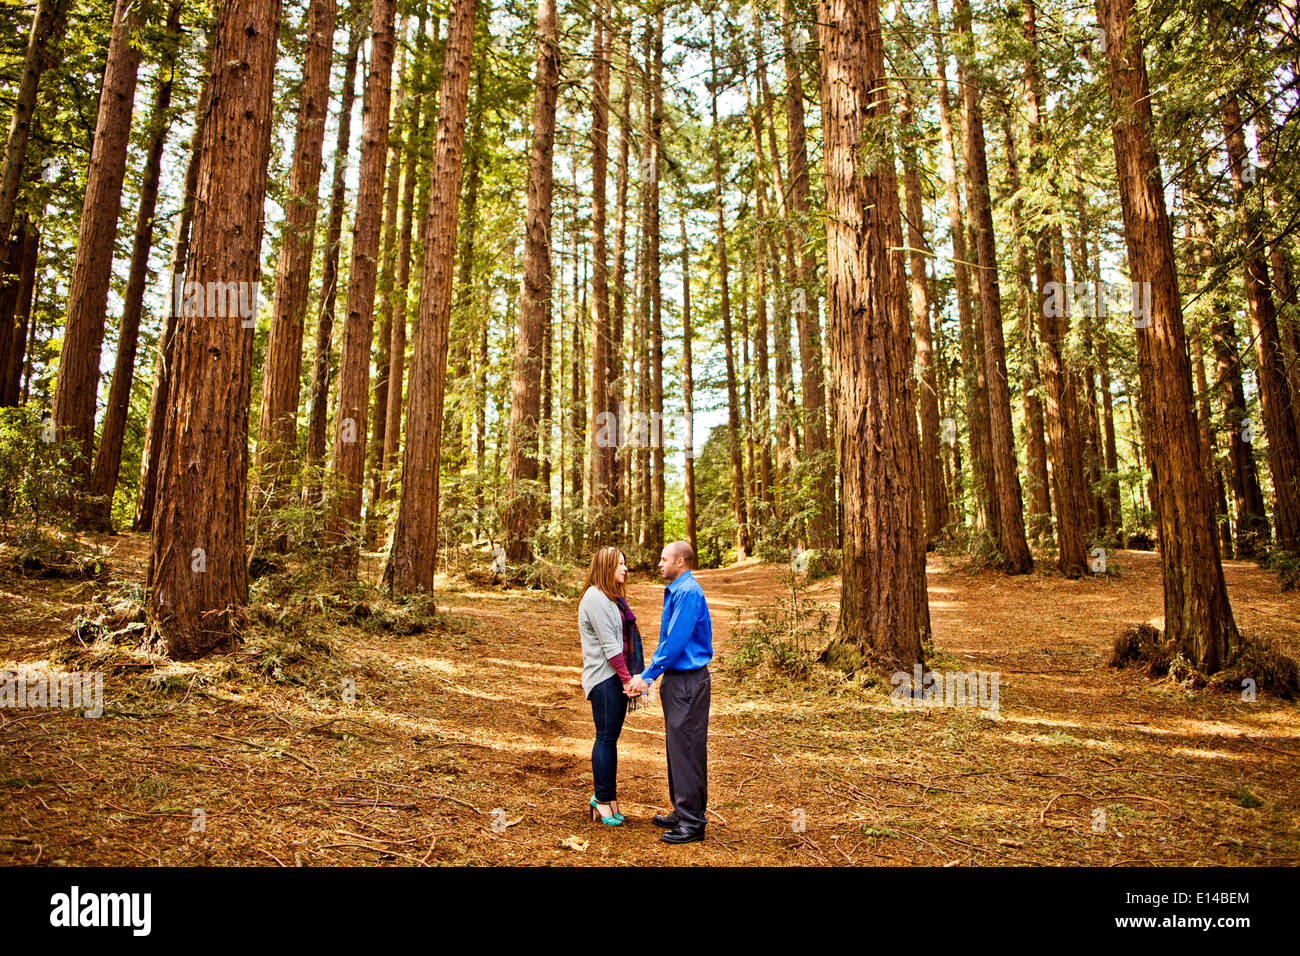 Hispanic couple holding hands in forest Banque D'Images